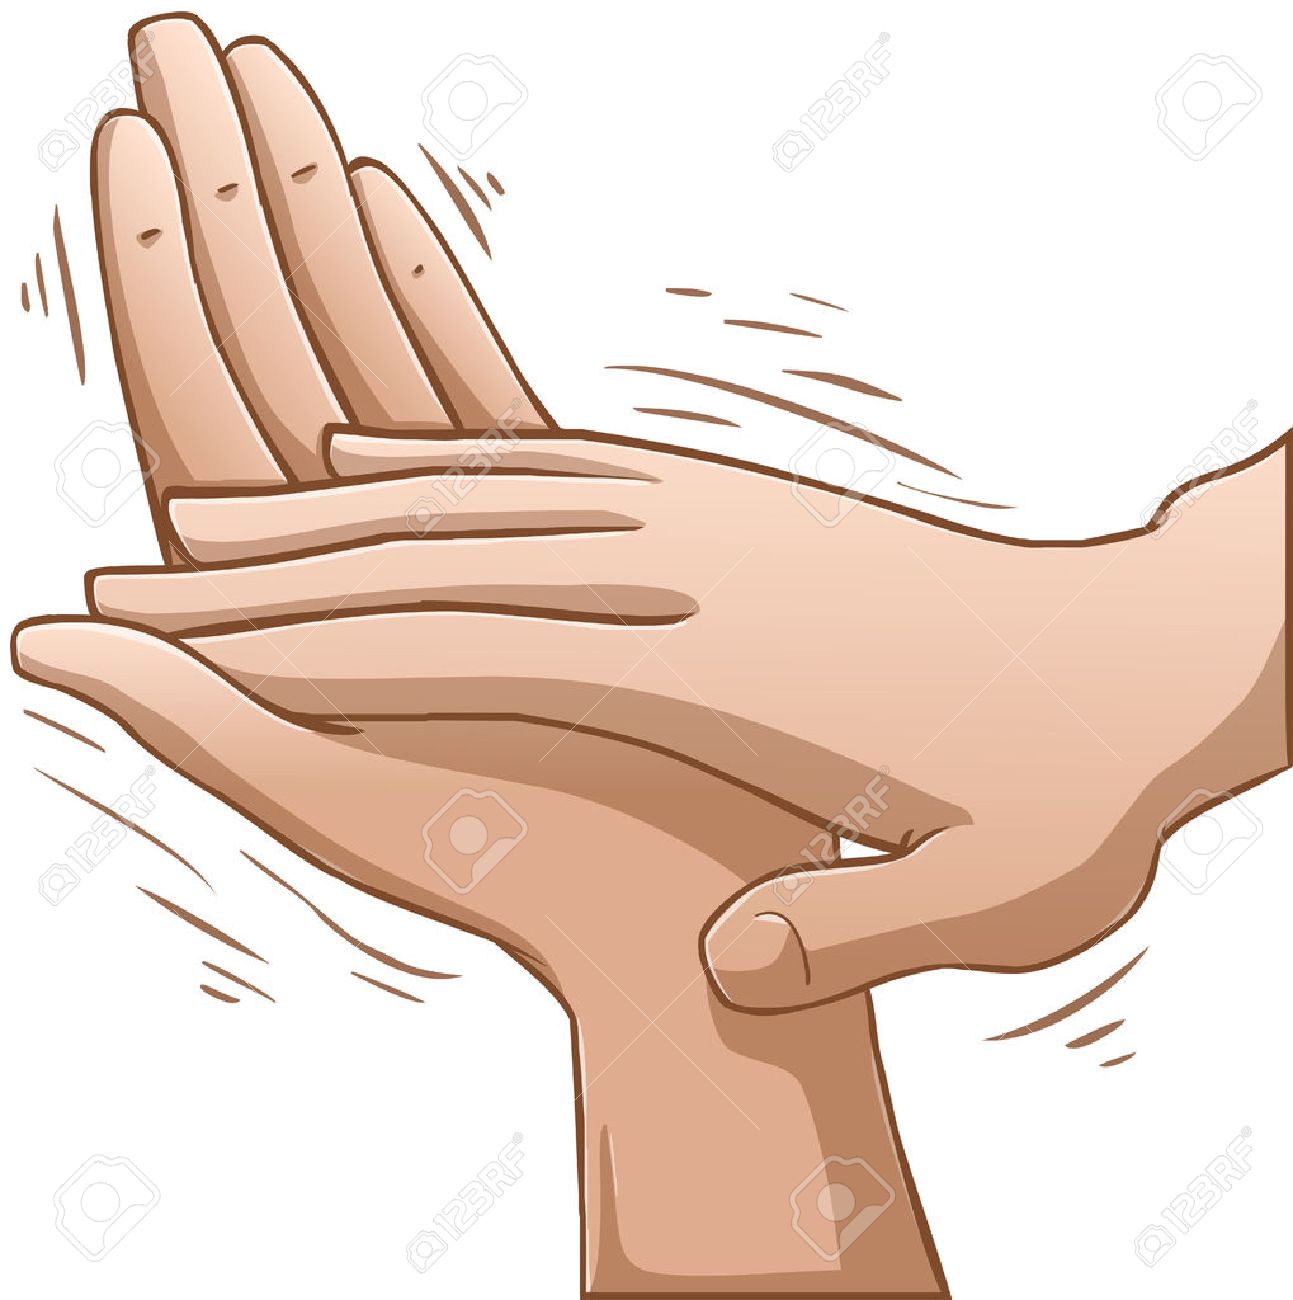 24503532-A-vector-illustration-of-clapping-hands-Stock-Photo.jpg